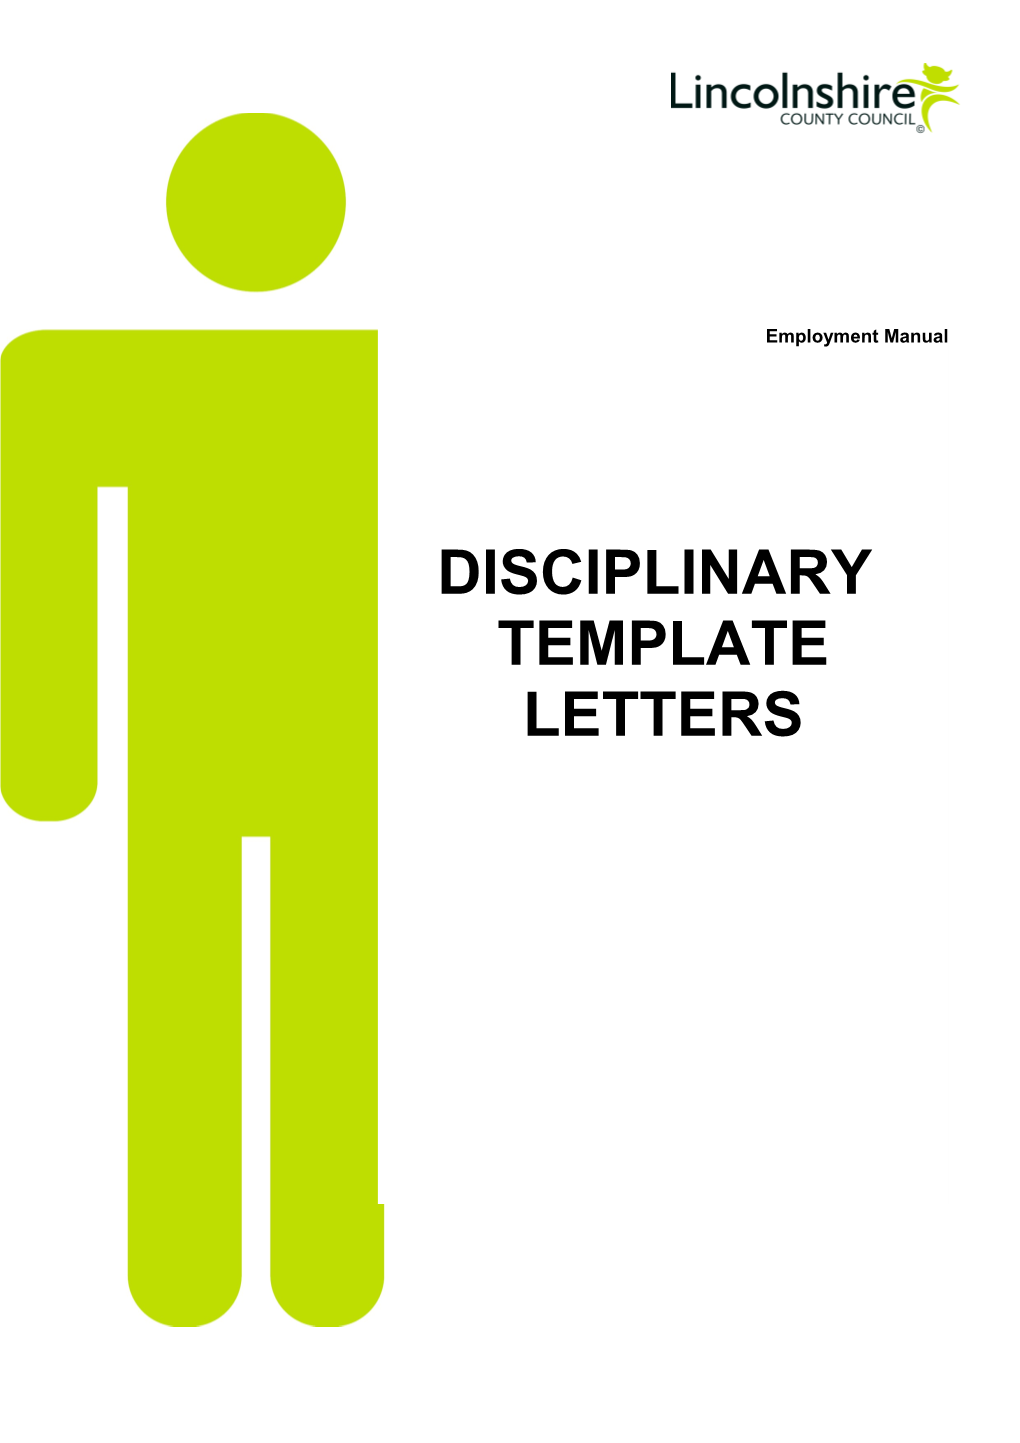 Disciplinary Template Letters